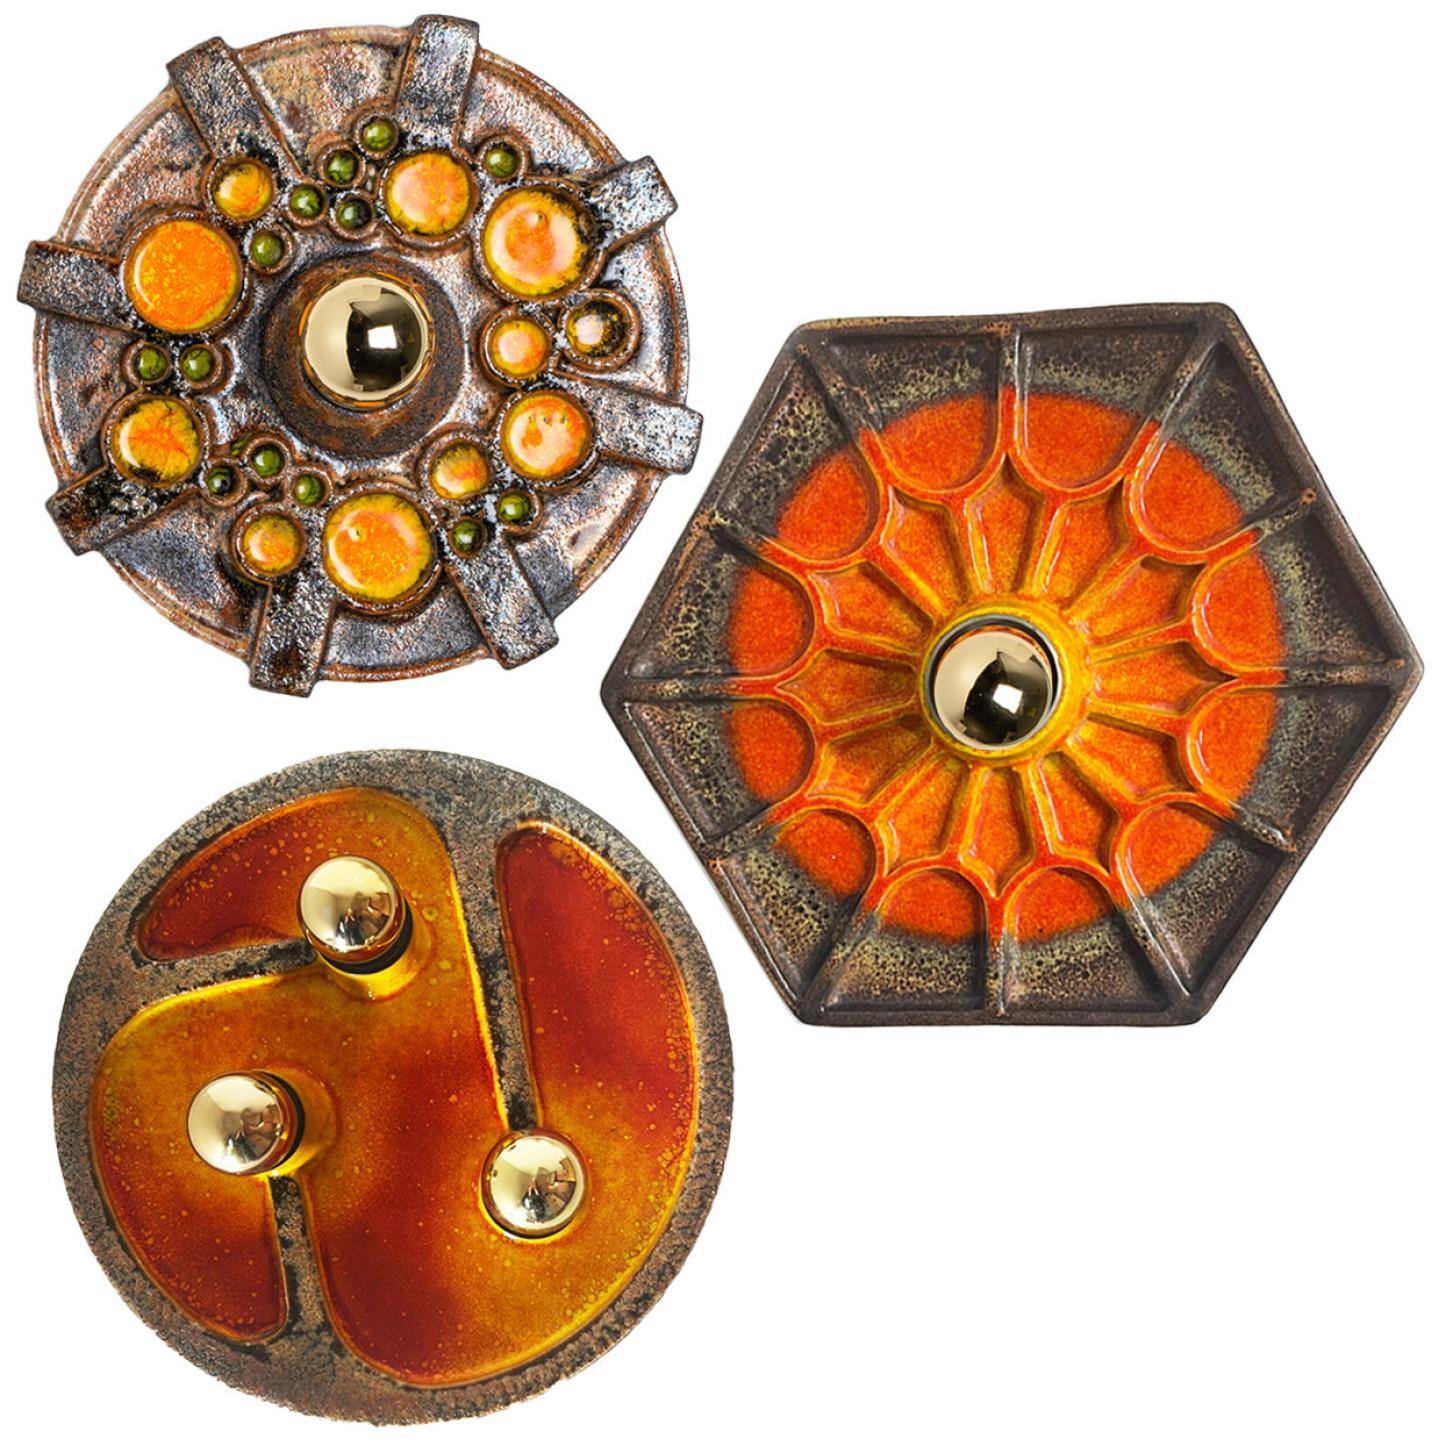 An exceptional set of  Orange/Braun Ceramic wall lights. Manufactured in Germany in the 1970s.

The set shows a playful variety of colors. The glaze of the set has a dark orange, green and a grayish brown color.

The fixtures can also by used as